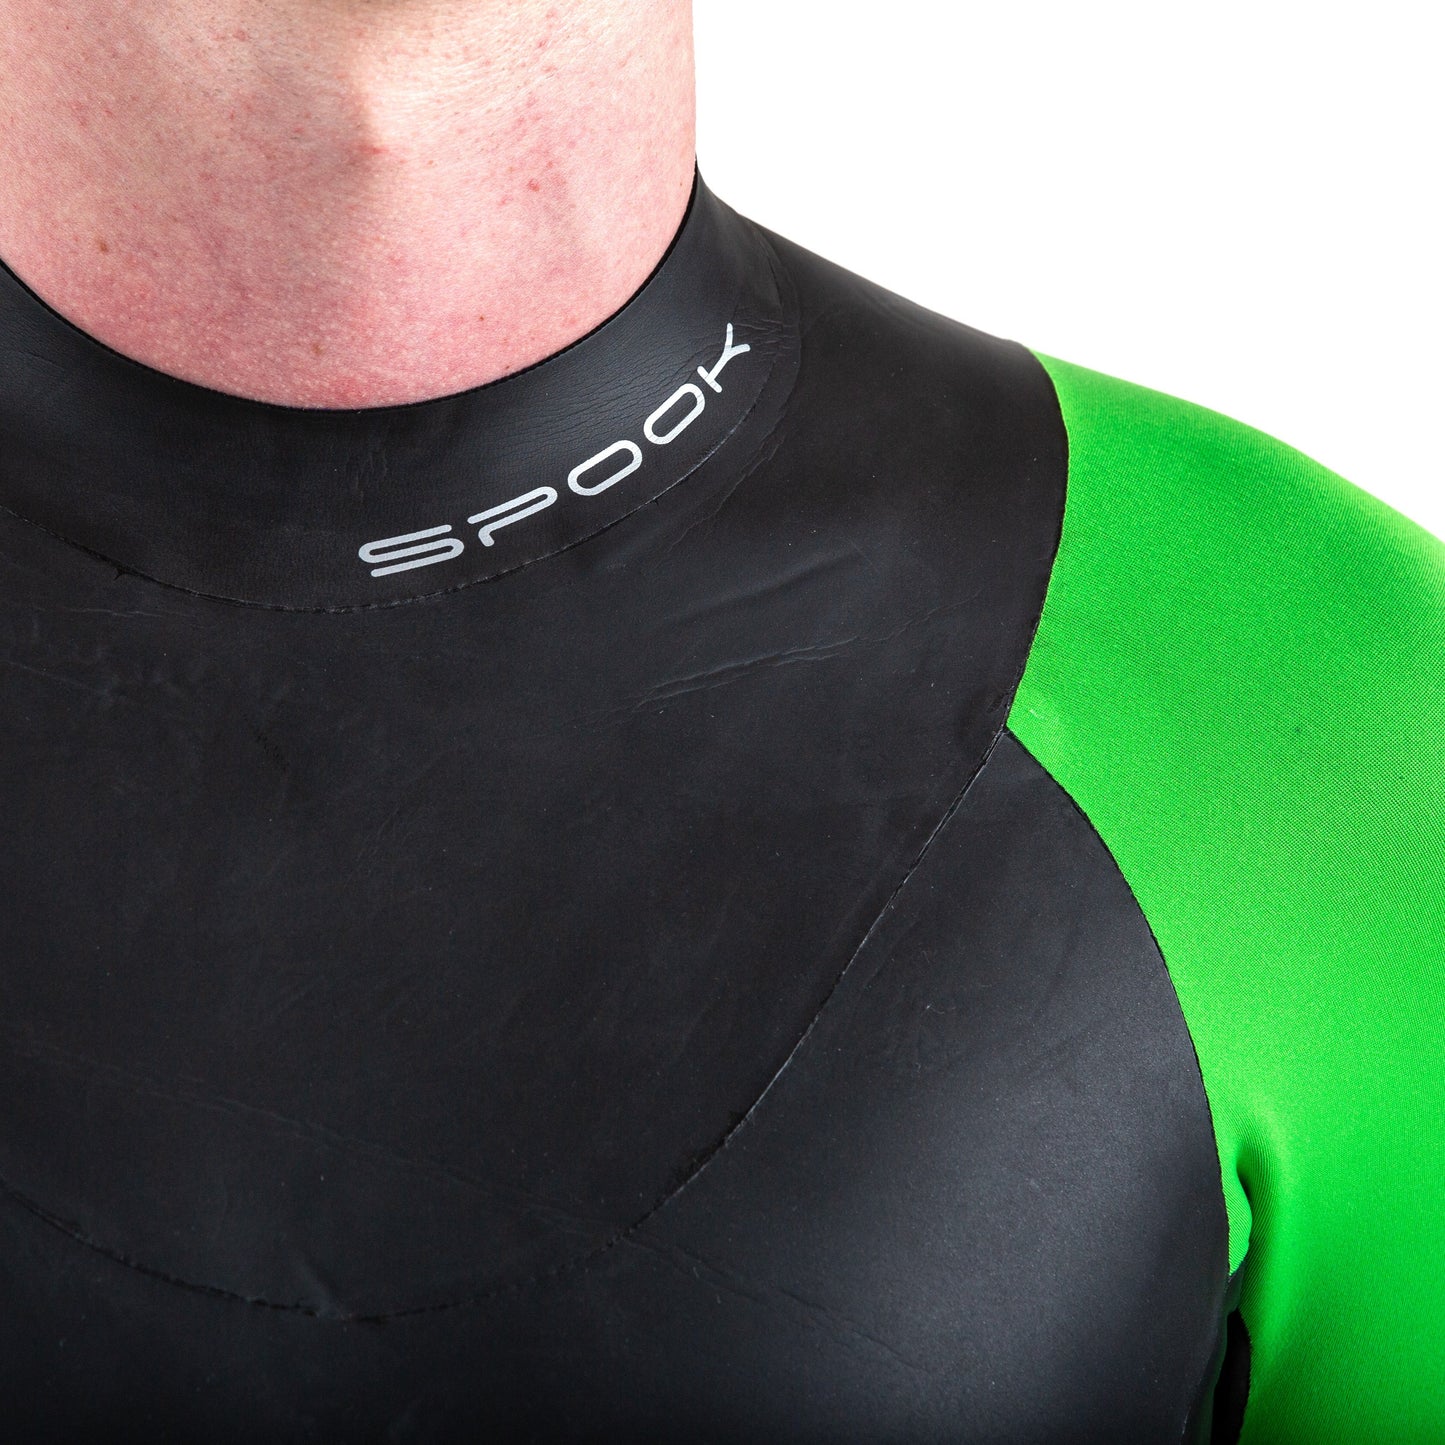 Close up of the neck area of a man in the Spook Wetsuit by Yonda. The perfect wetsuit for Open Water Swimming.